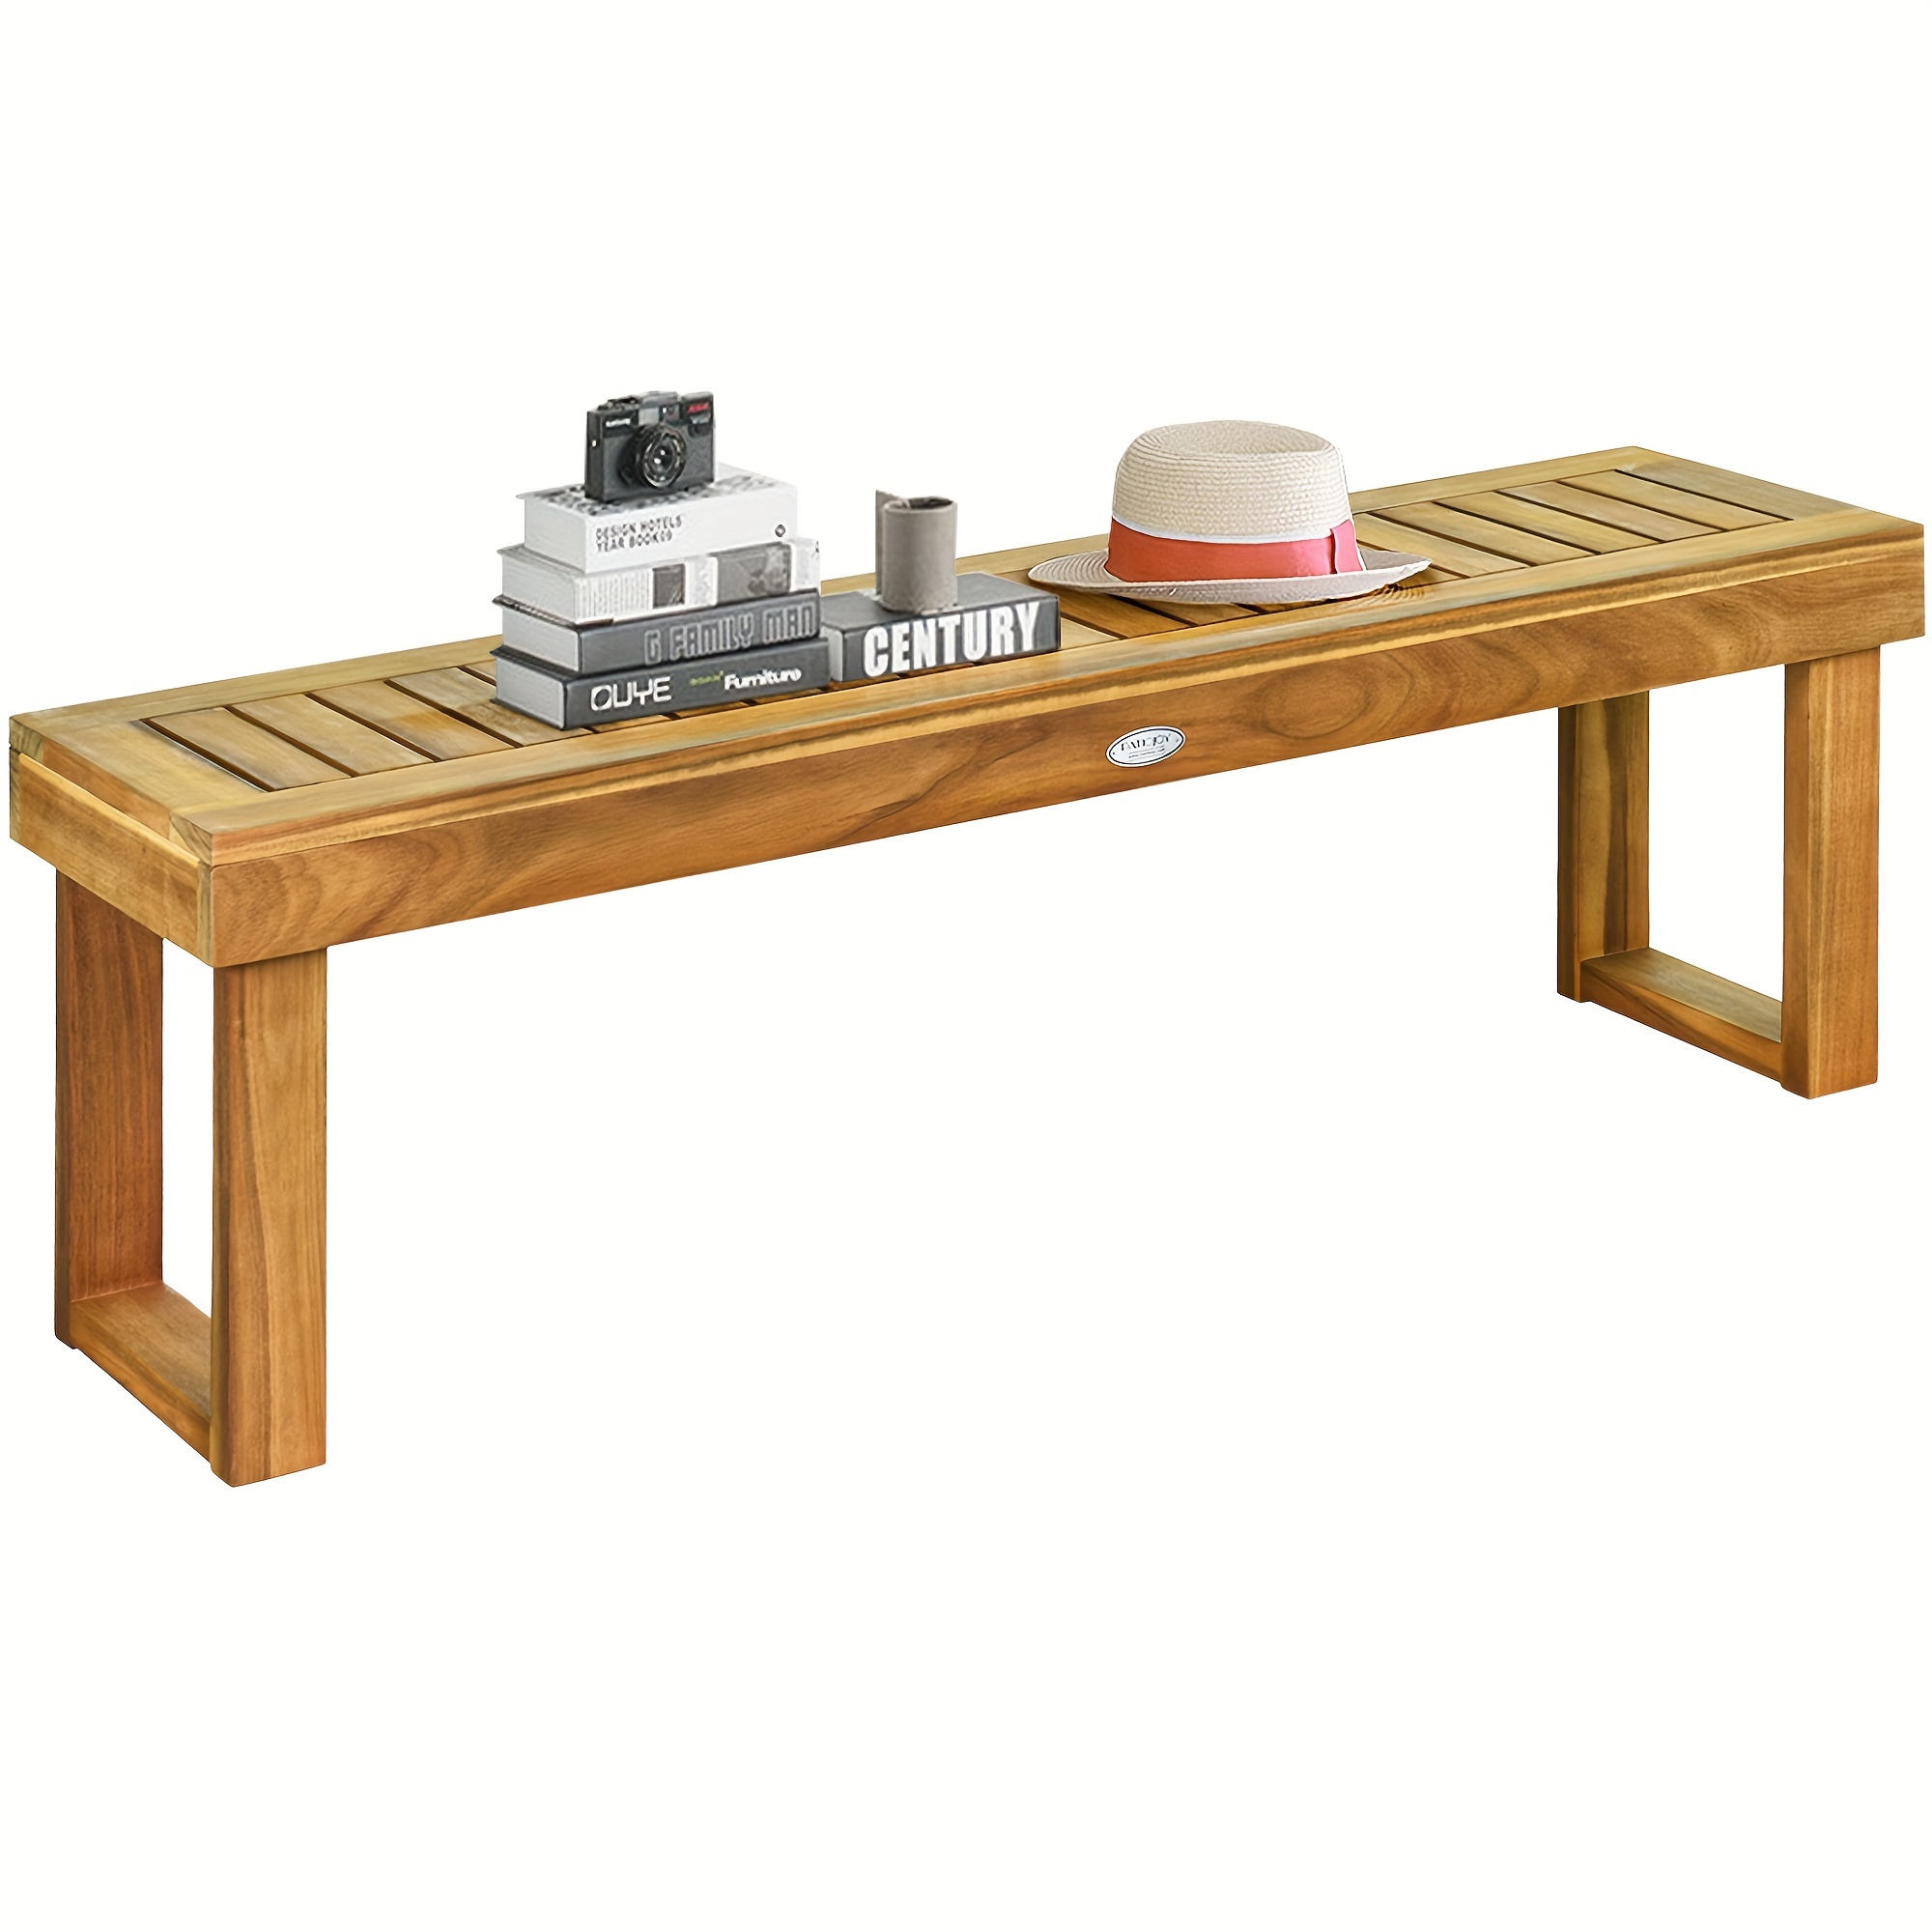 

Acacia Wood Bench Dining Bench Patio Garden W/ Slatted Seat Indonesia Teak